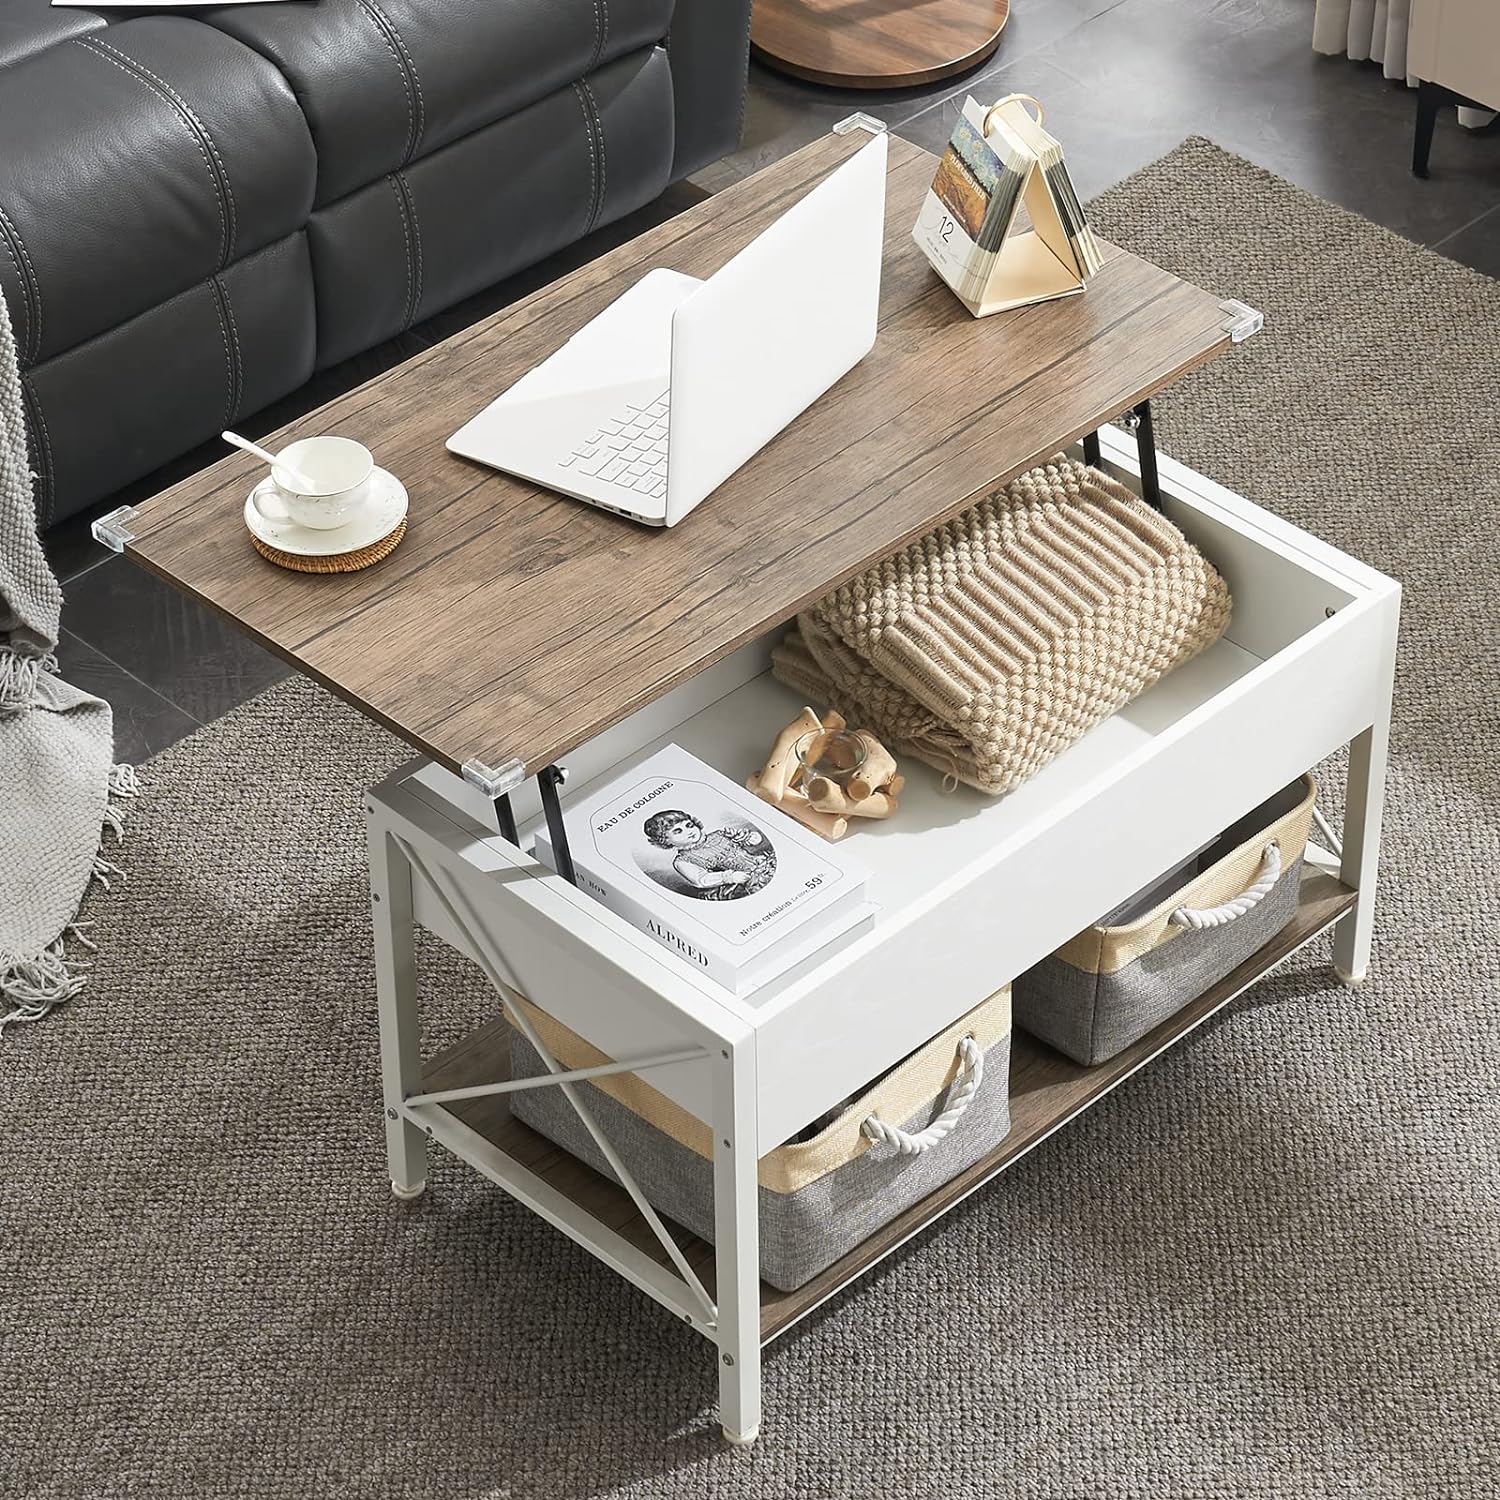 VINGLI 36 Lift Top Coffee Table with Free Cloth Storage Bins, White Walnut Framhouse Coffee Table for Living Room, Small Modern Coffee Table for Small Space in Minimalistic Style, Dark Walnut